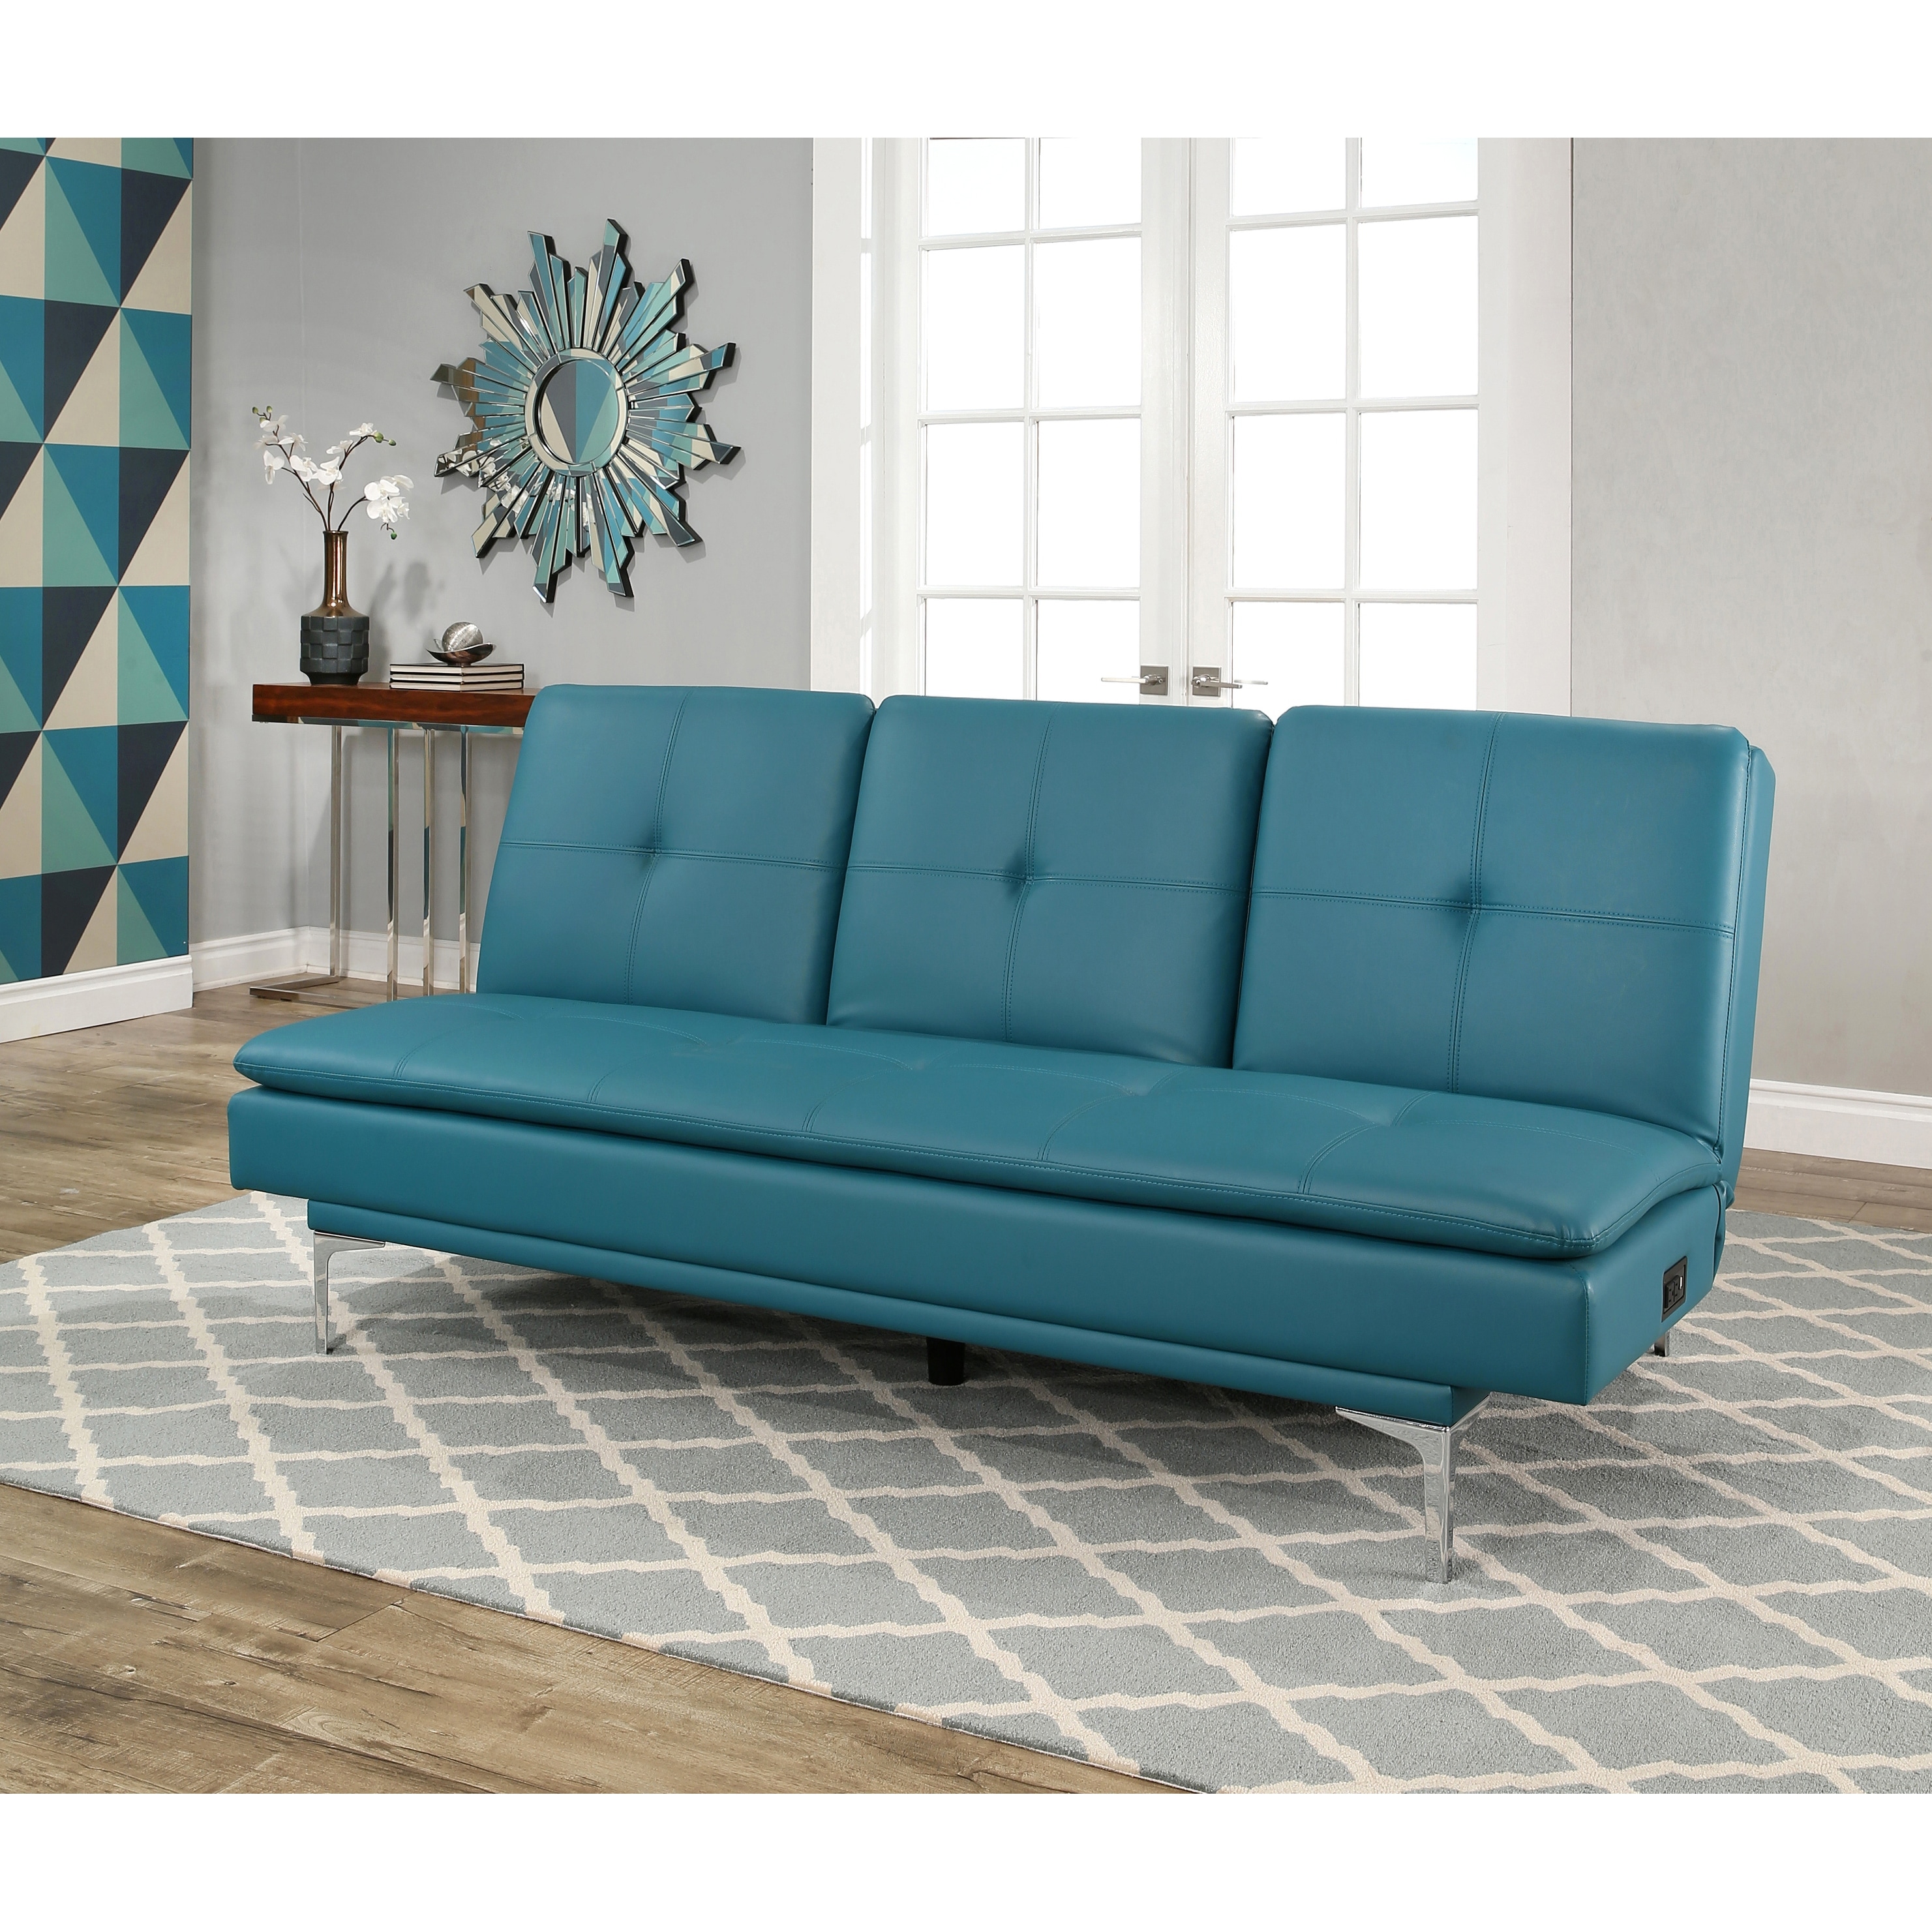 Abbyson Kilby Turquoise Bonded Leather Sofa Bed With USB Ports On Sale Overstock 19429173